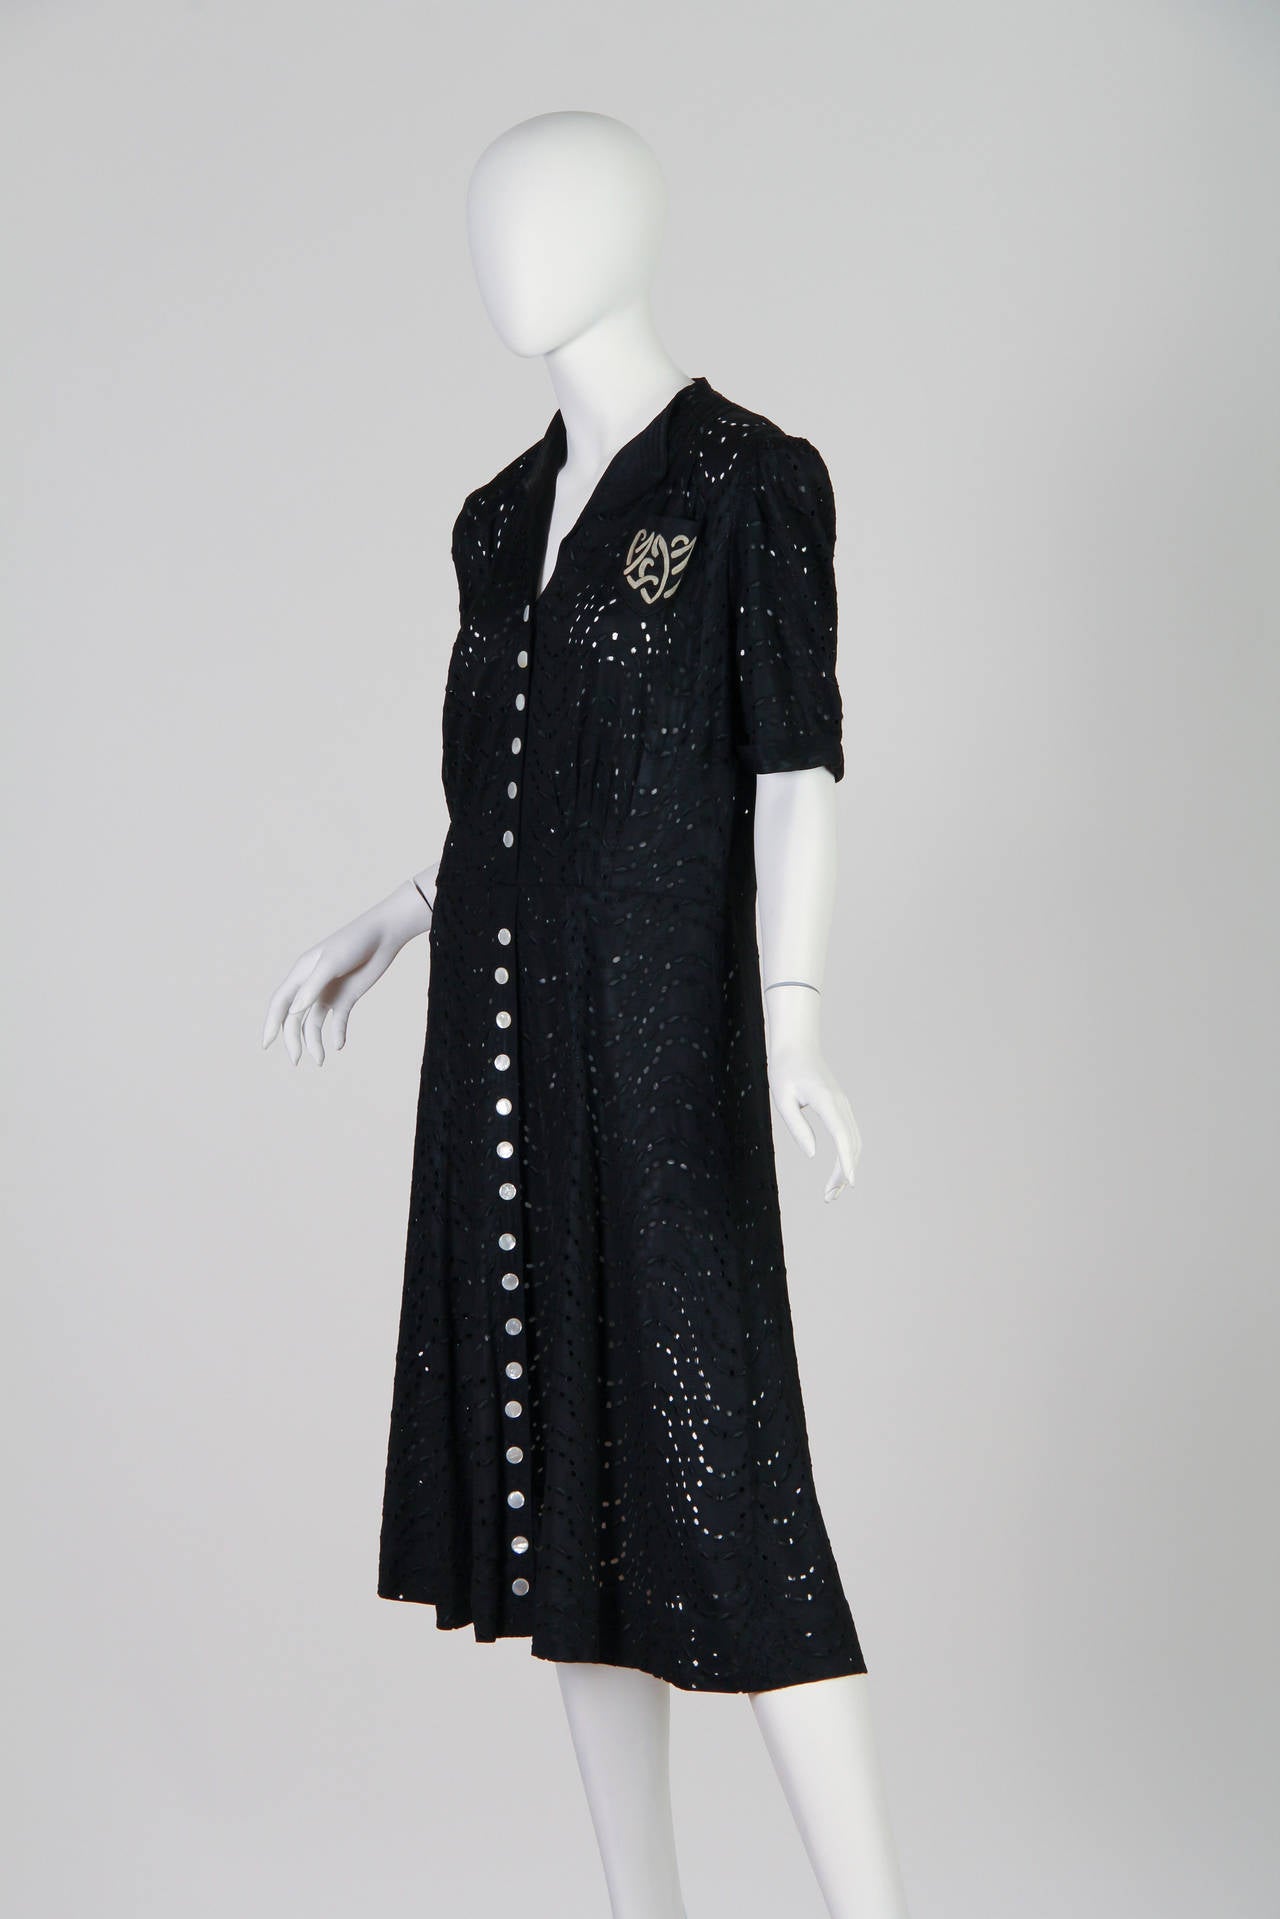 Fabulous dress in fabulous condition. The dress is either a rayon or silk jersey with an all over eyelet lace embroidery. Dating to the mid to late 1930s with beautiful original mother of pearl buttons.